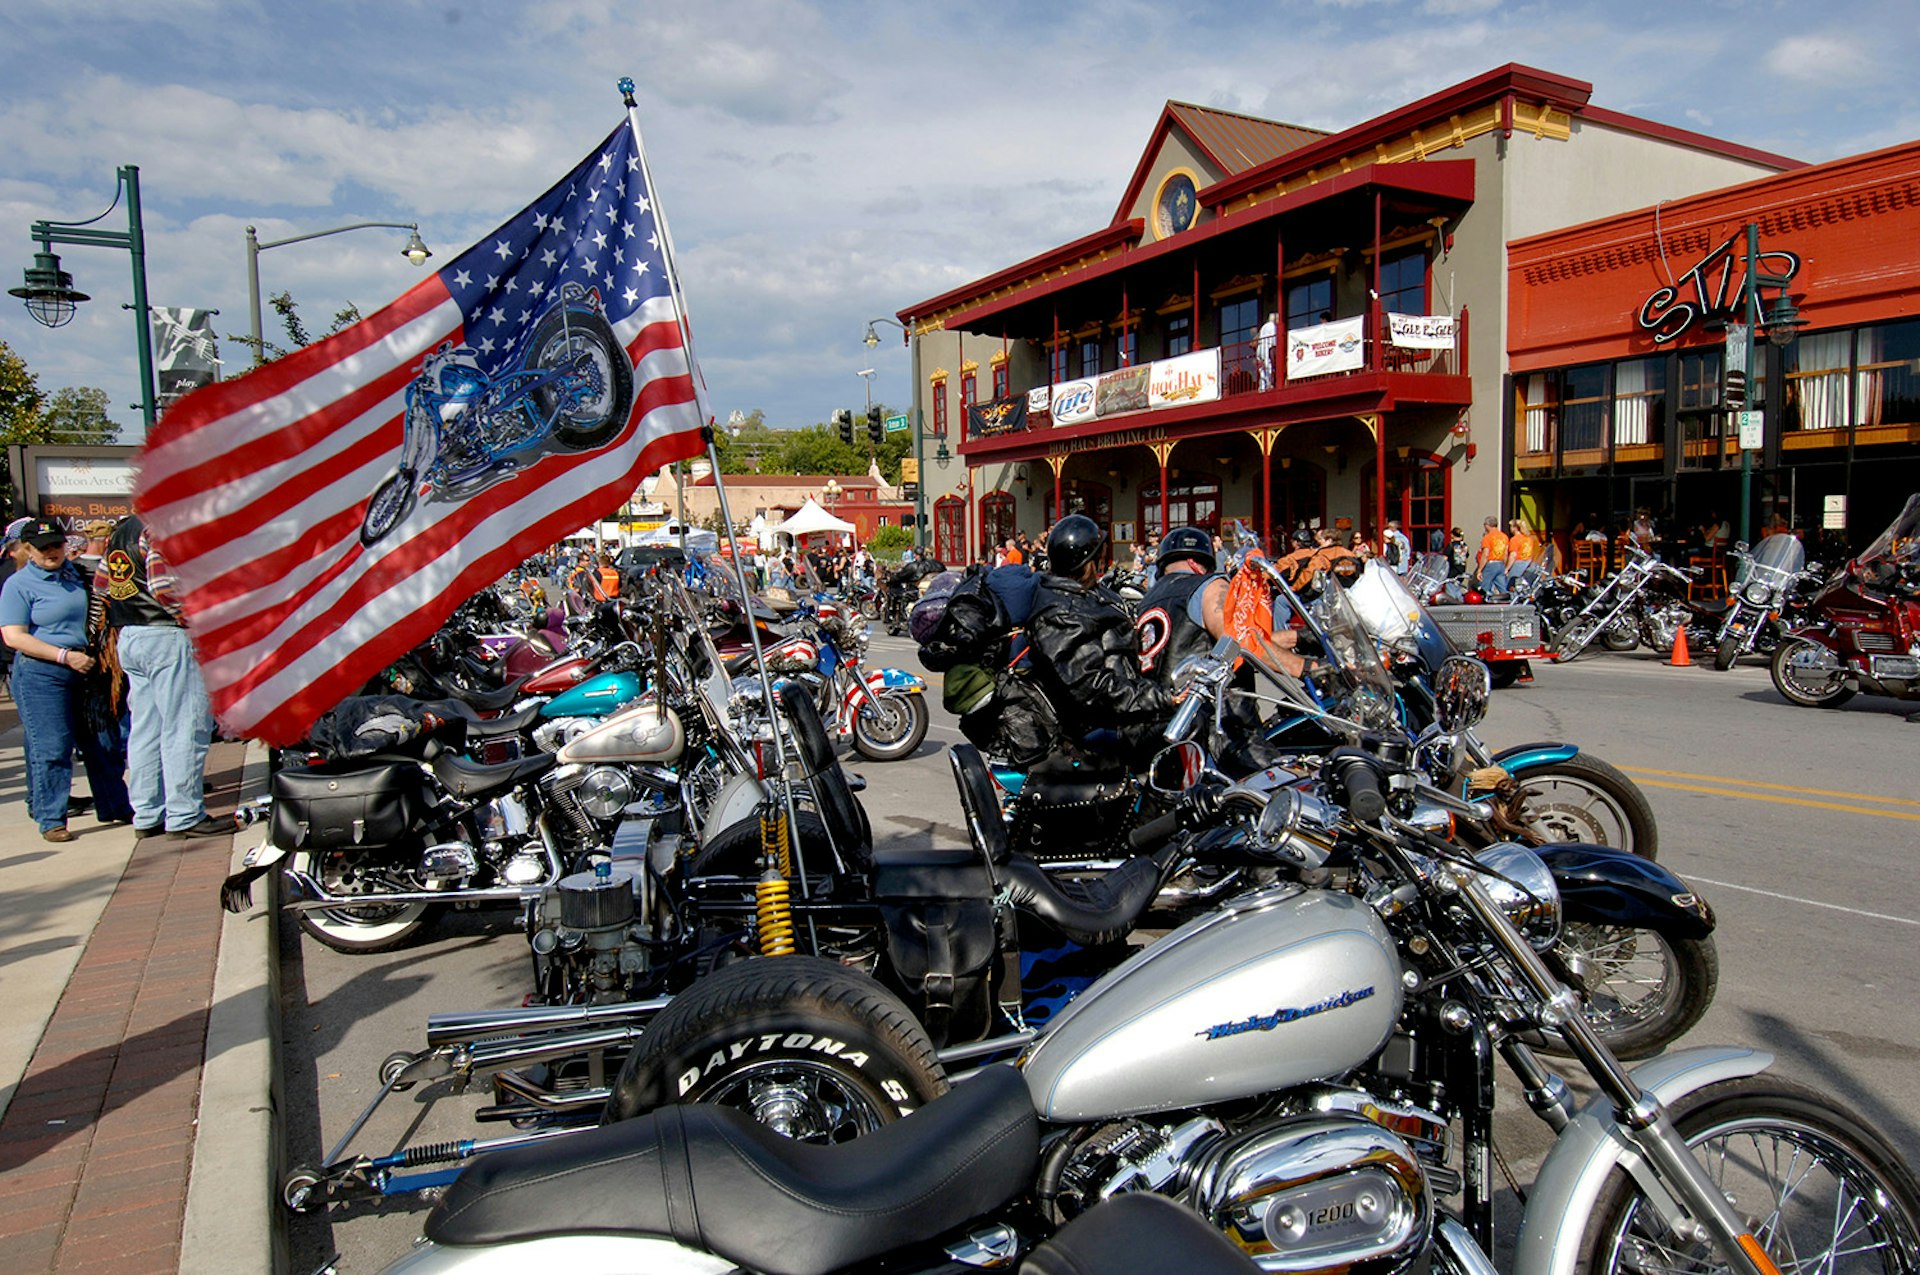 Fayetteville hosts an annual Bikes, Blues & BBQ rally . Image courtesy of Arkansas Department of Parks and Tourism